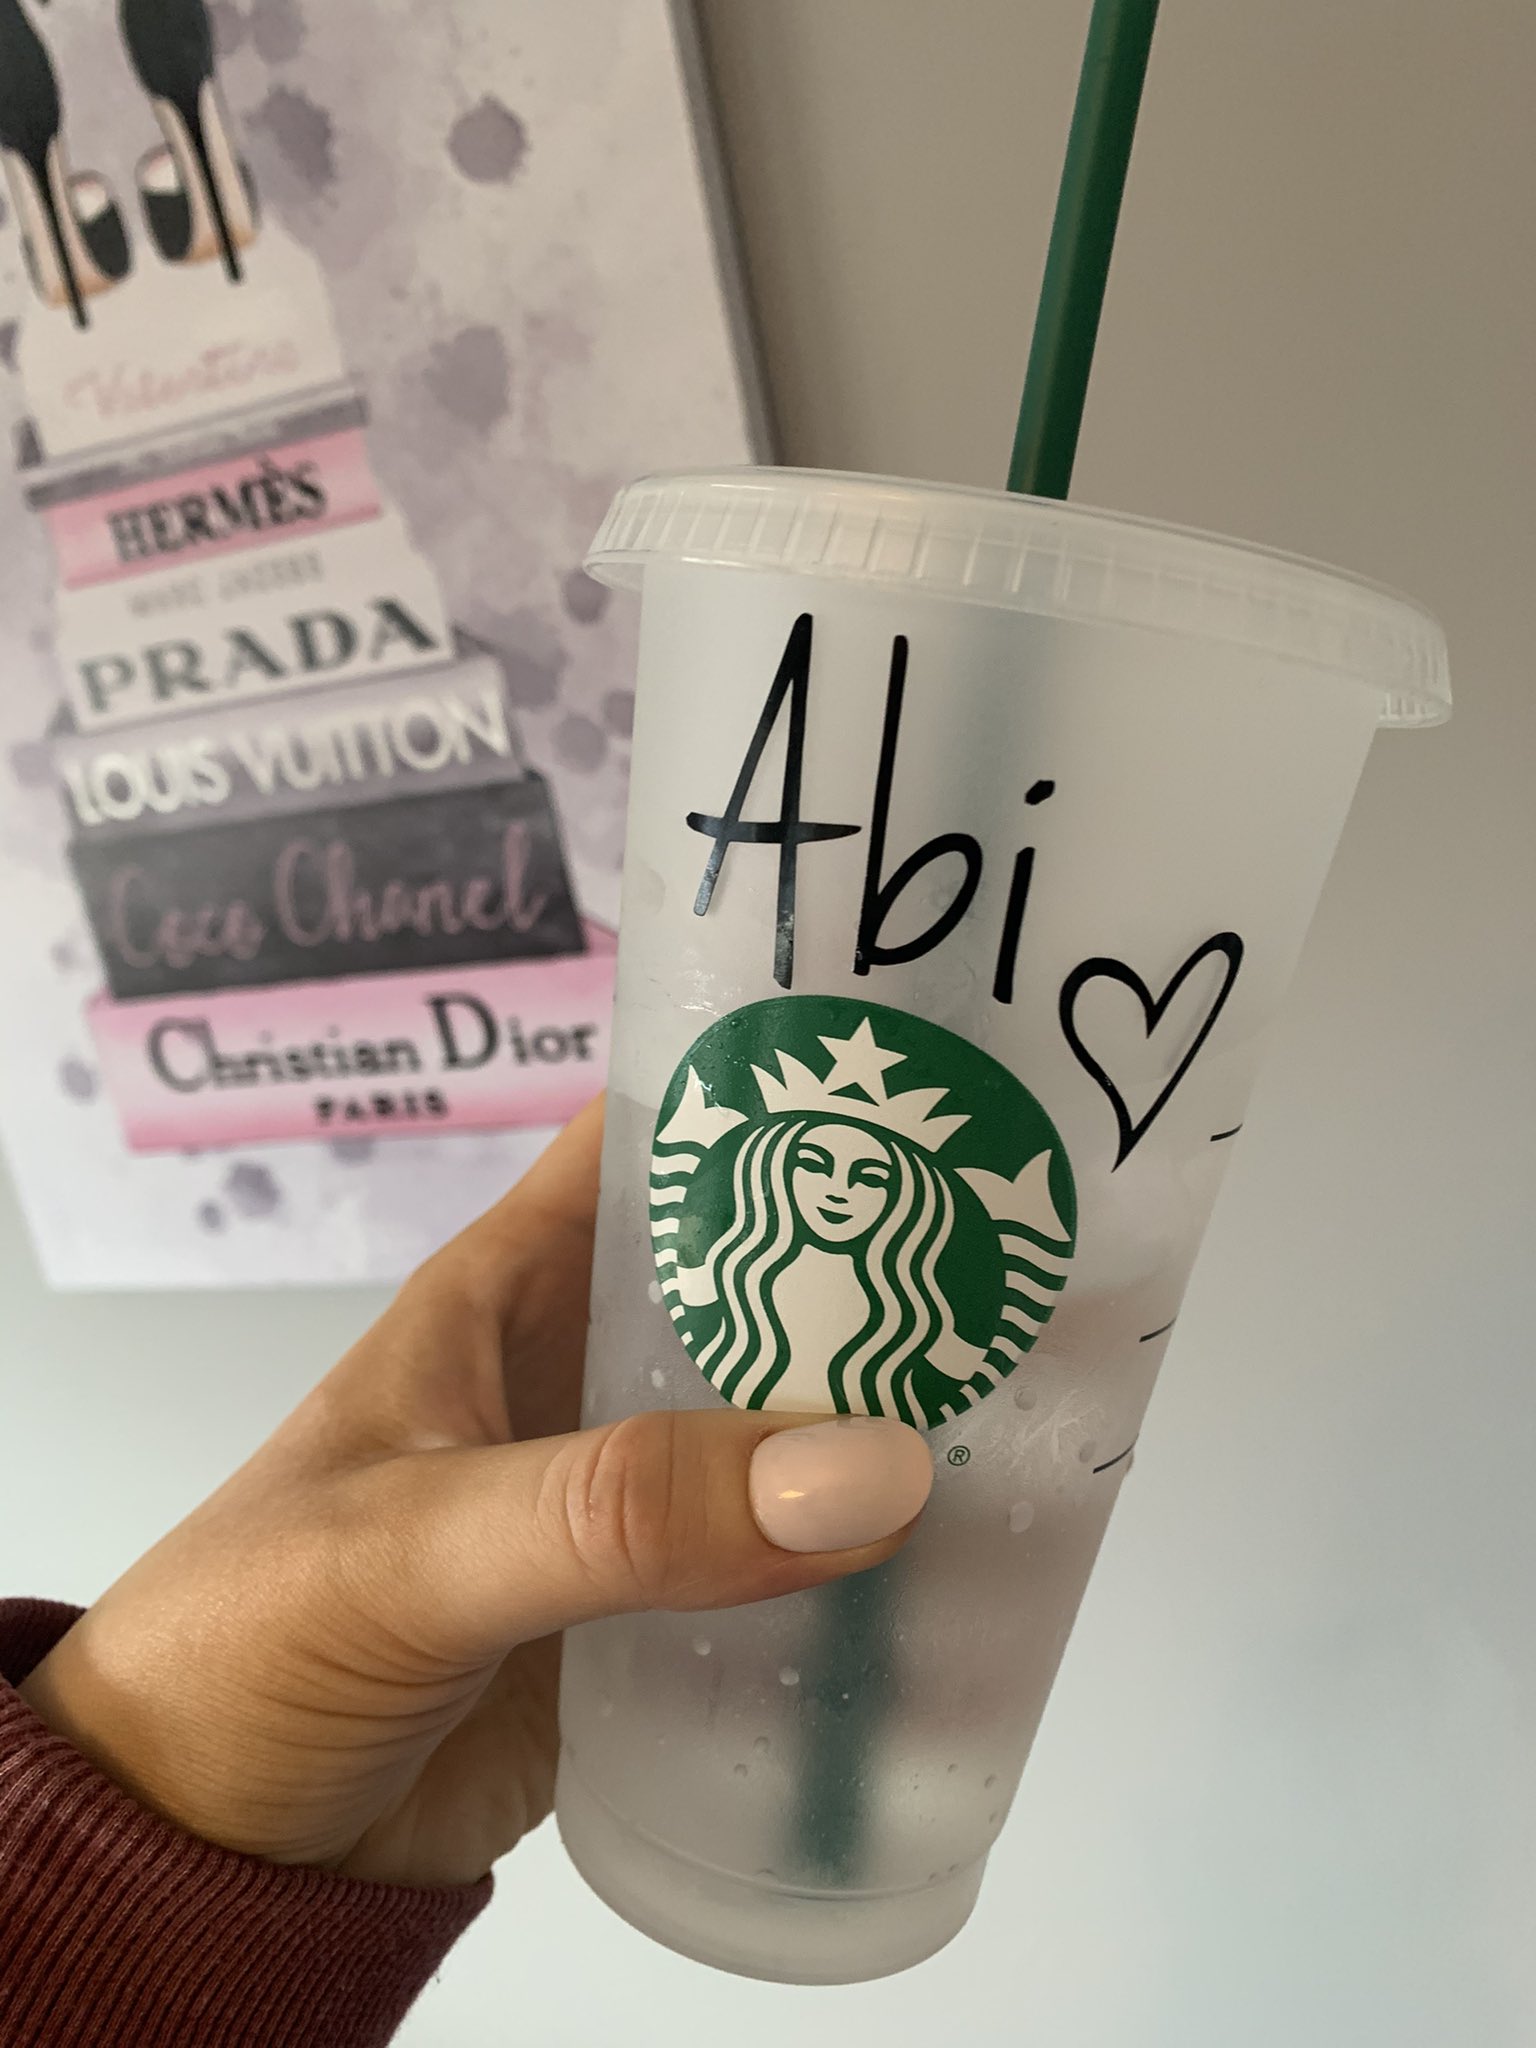 abs on X: so obsessed with my personalised starbucks cup from my